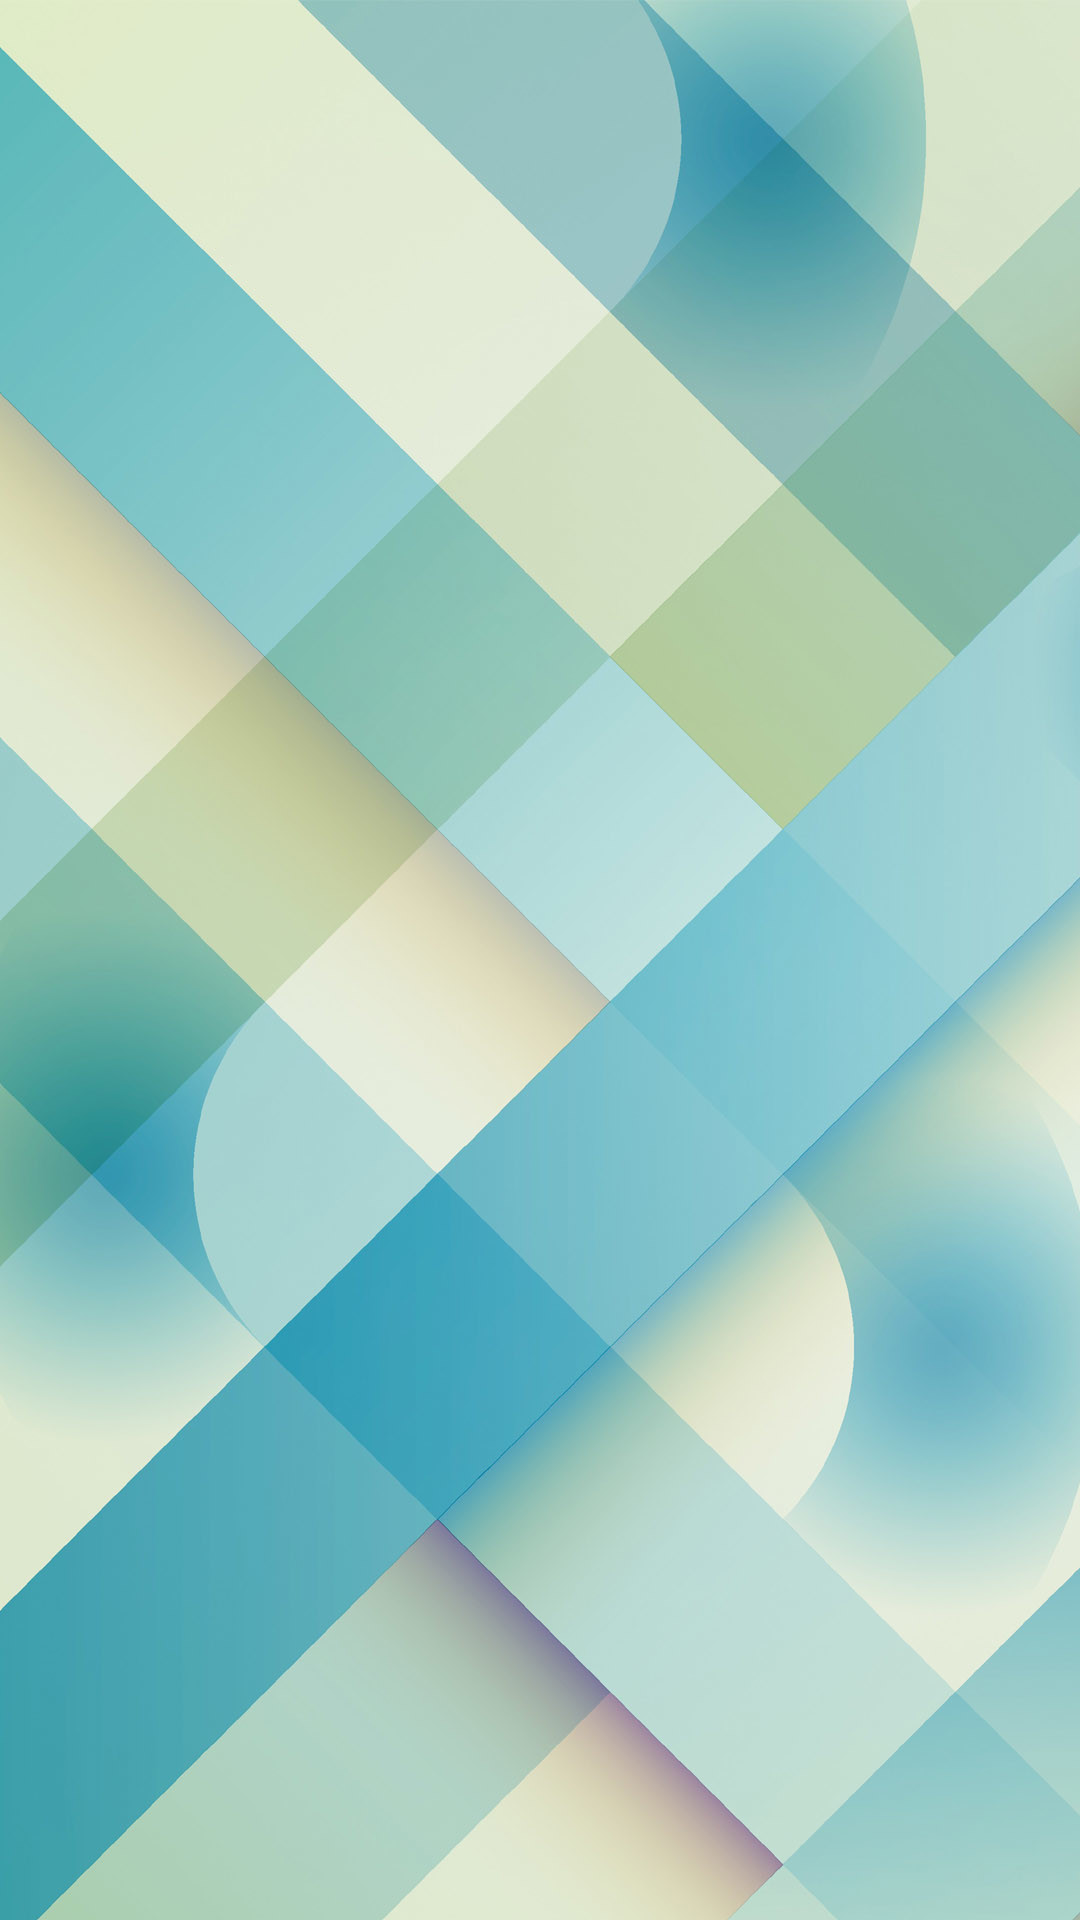 1080x1920 Nexus 5 Android 4.4 KitKat Default Light Blue Shapes Android Wallpaper